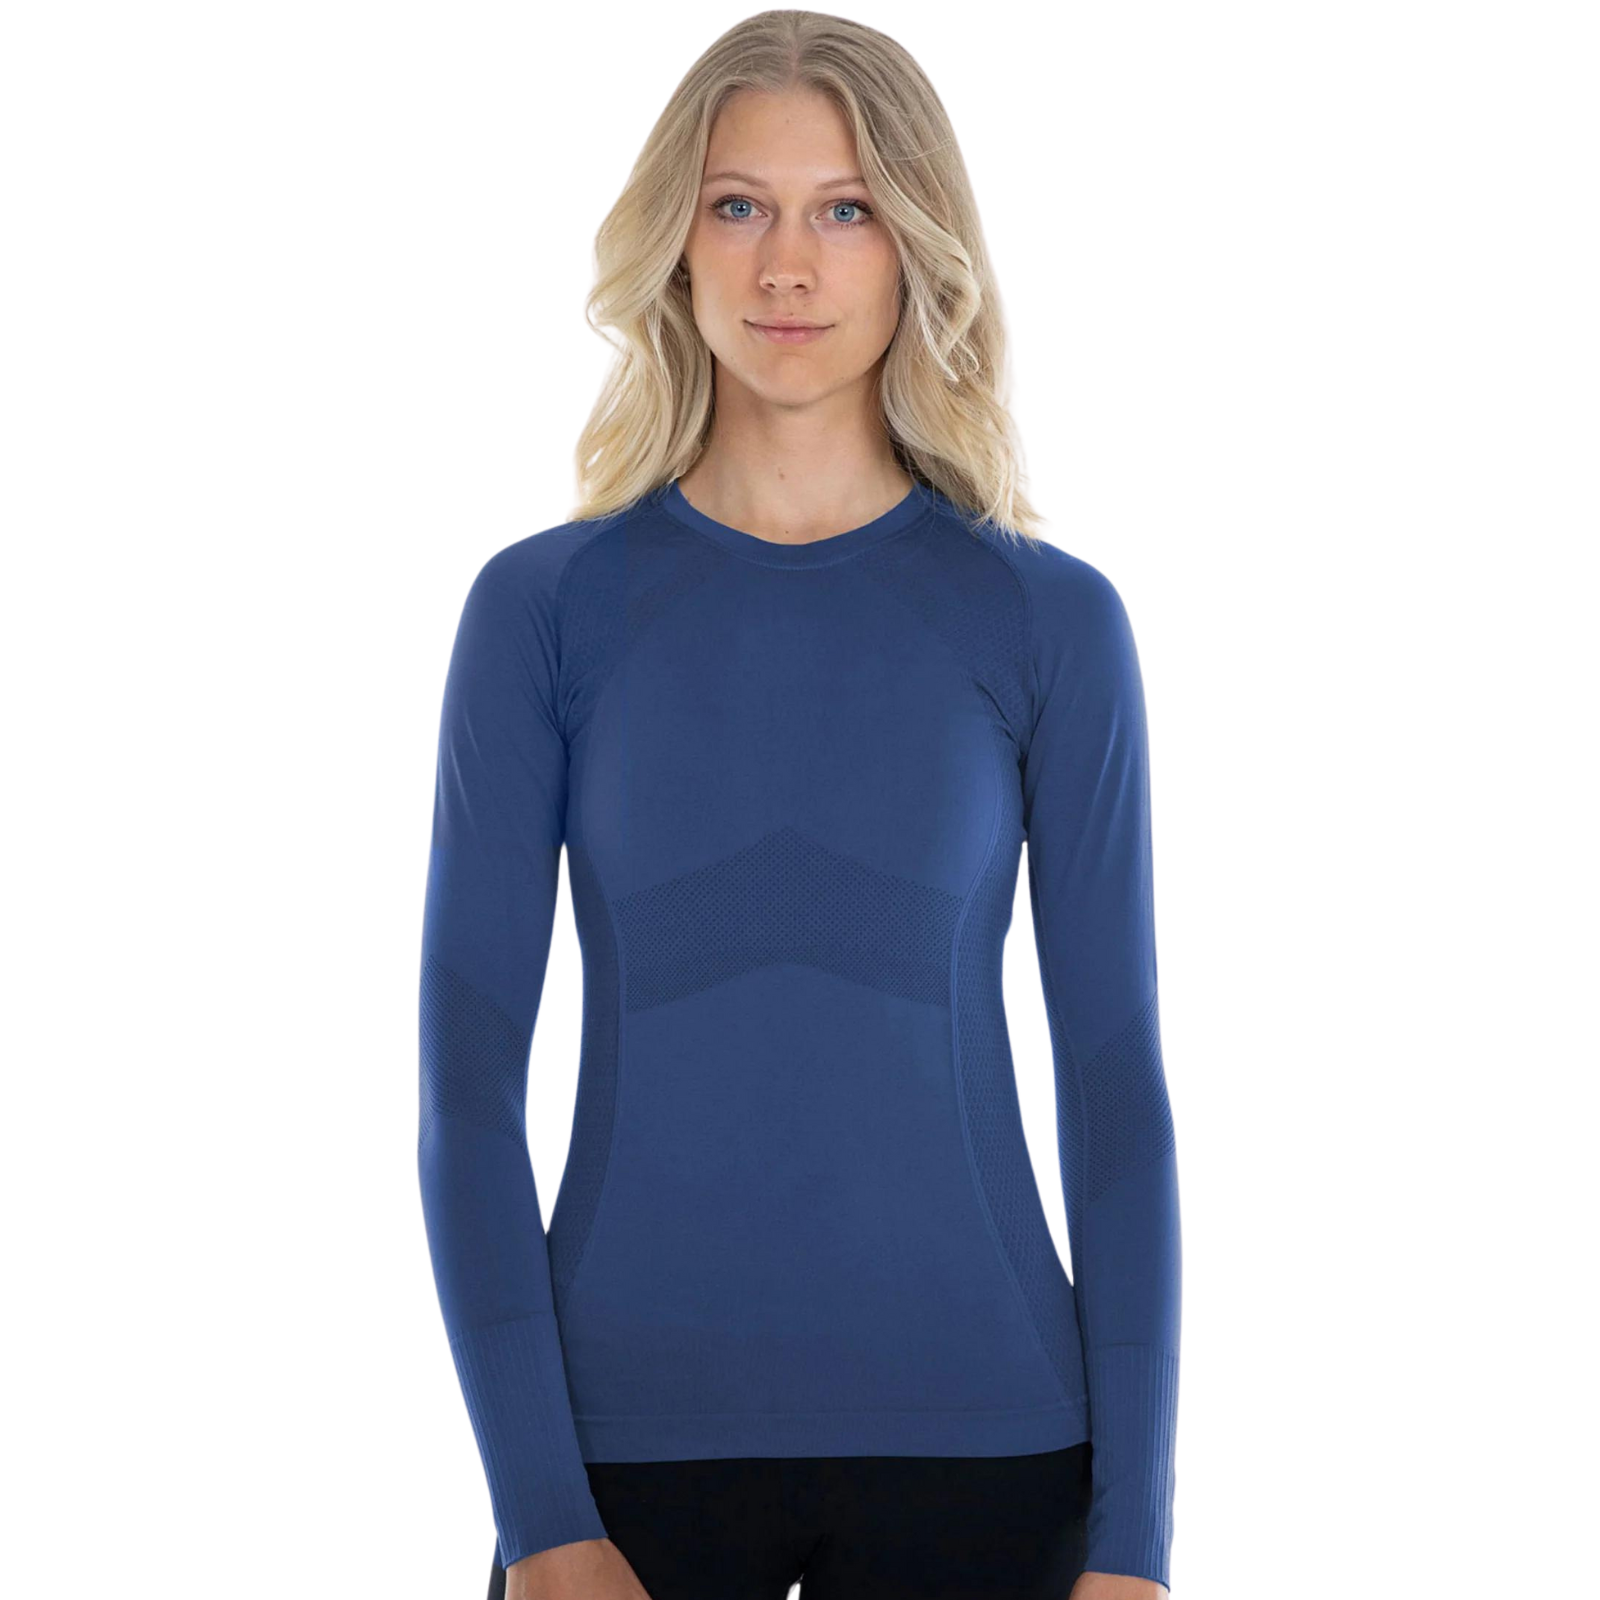 Anique Long Sleeve Crew Shirt in Blueberry - Women&#39;s Large (10)